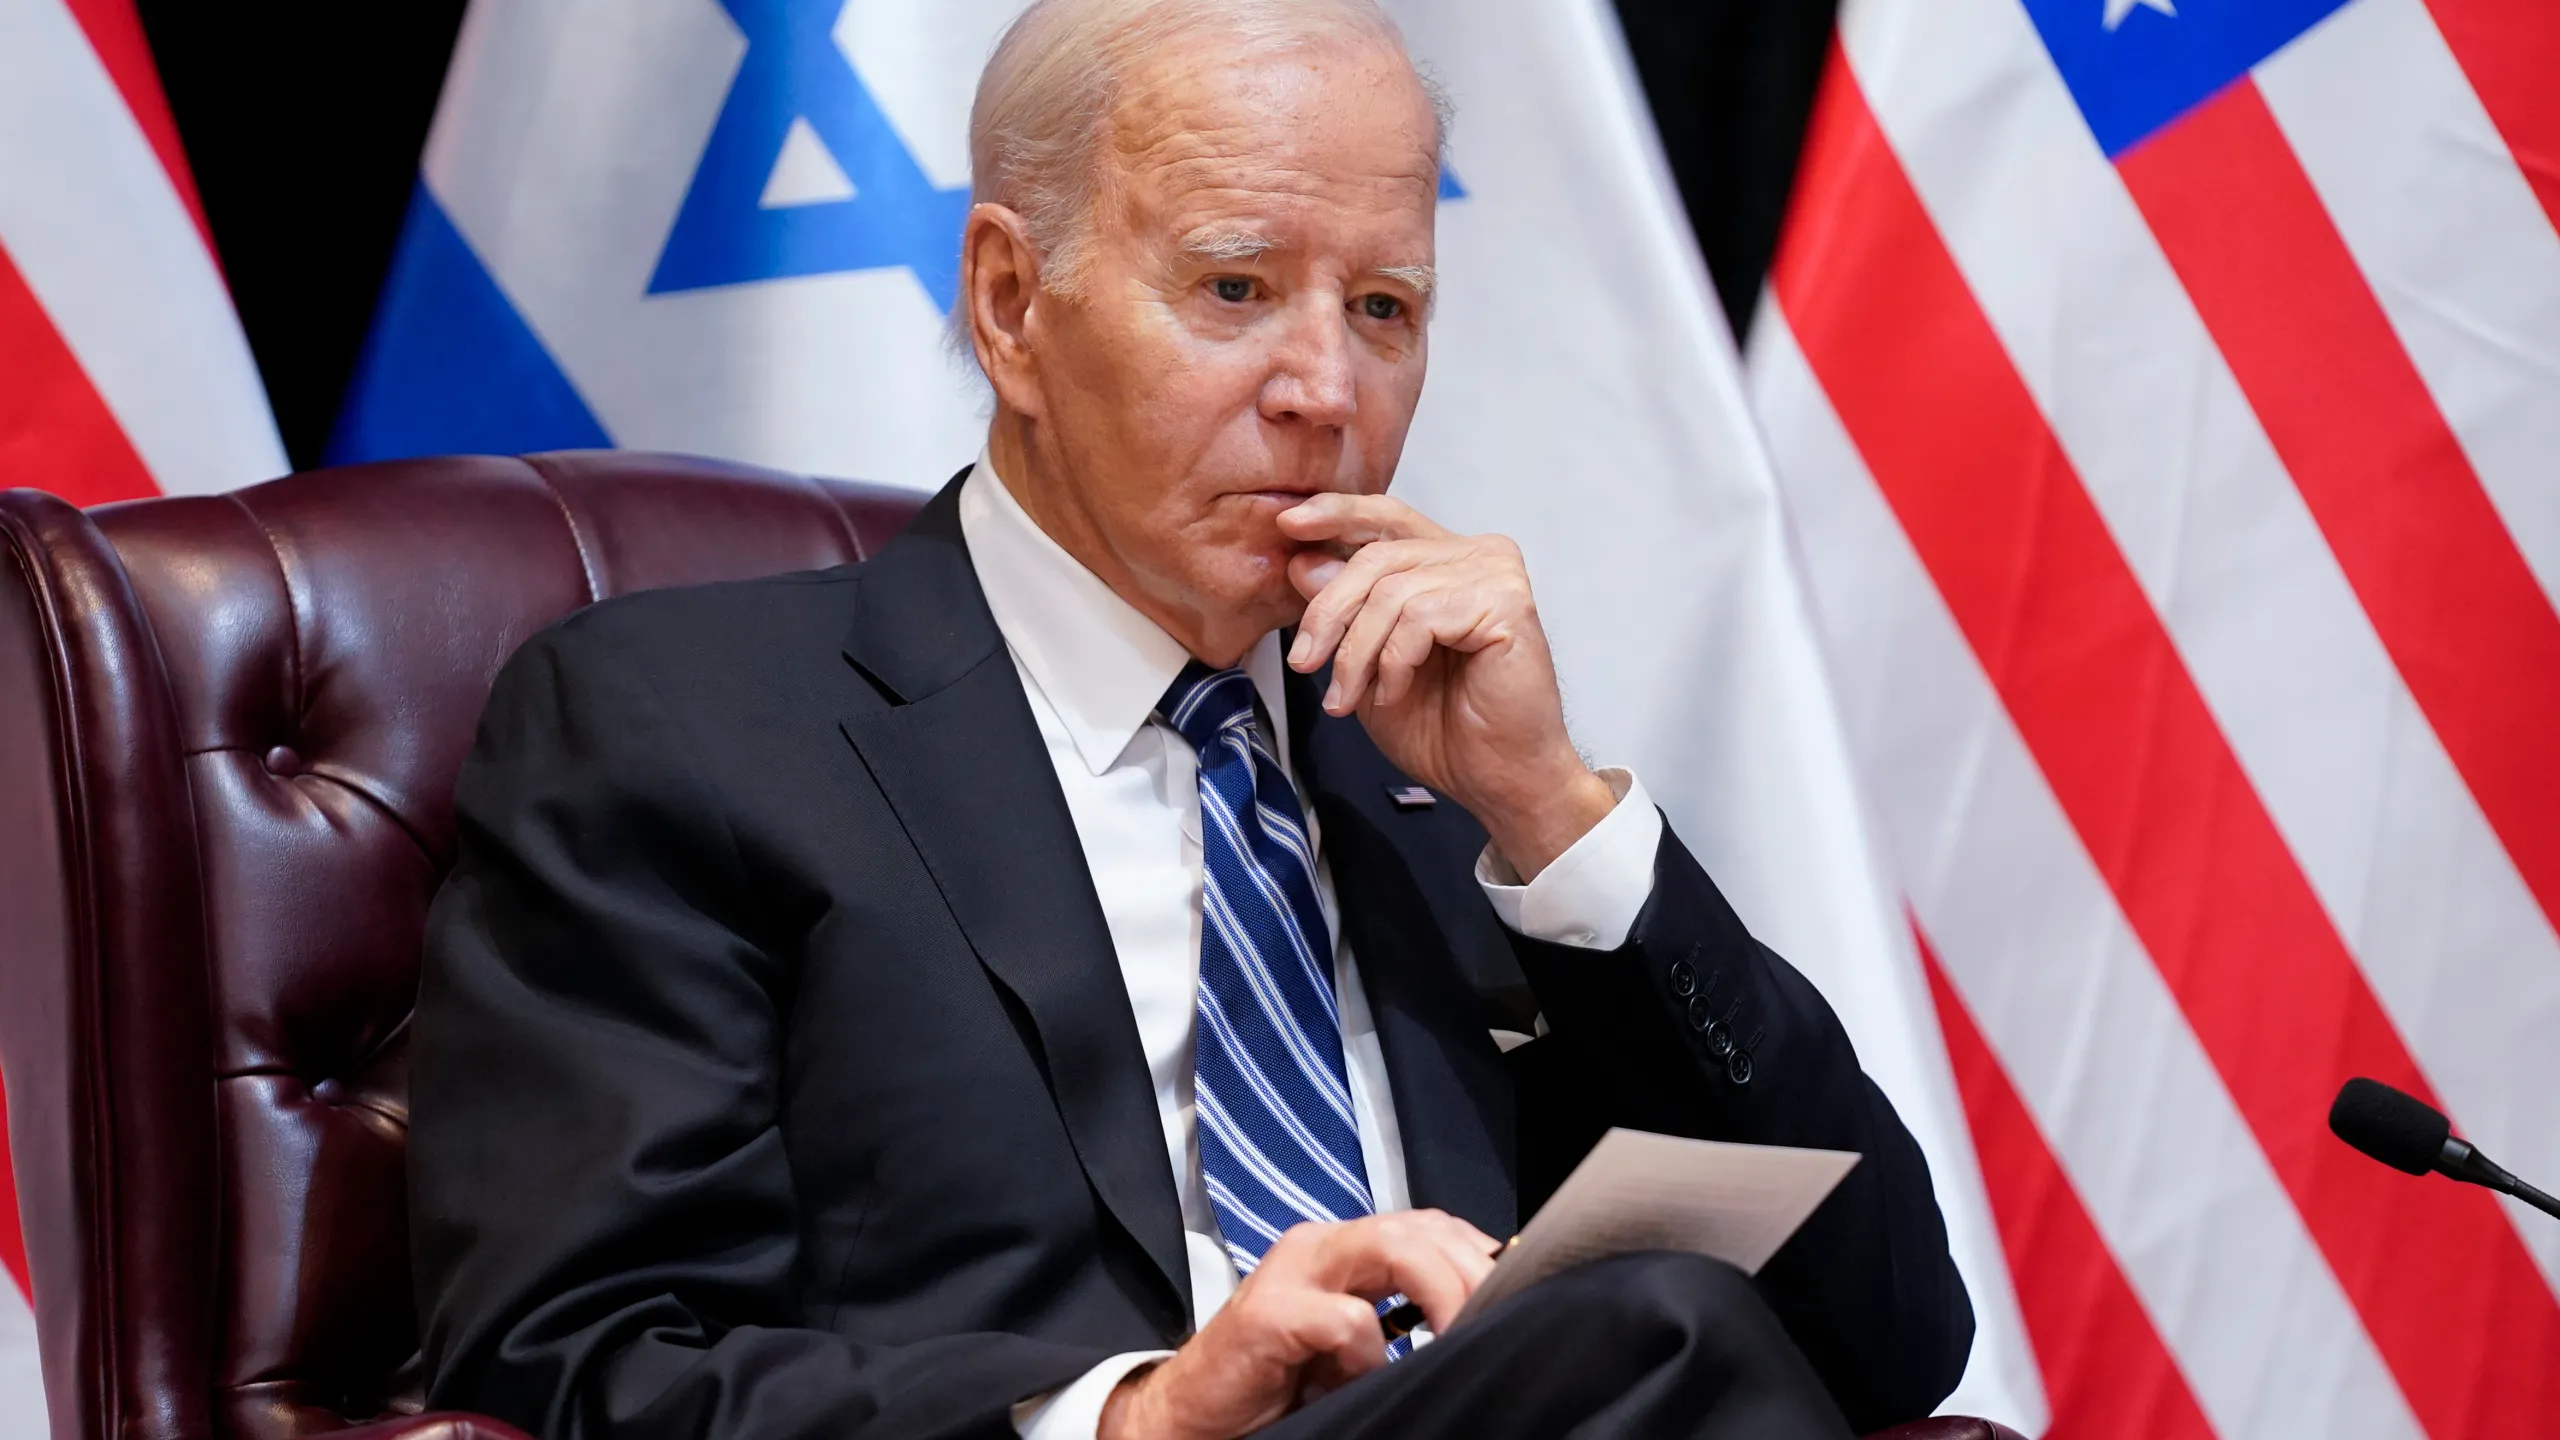 Biden's support for Israel faces scrutiny within his own party (Credits: Fox 59)